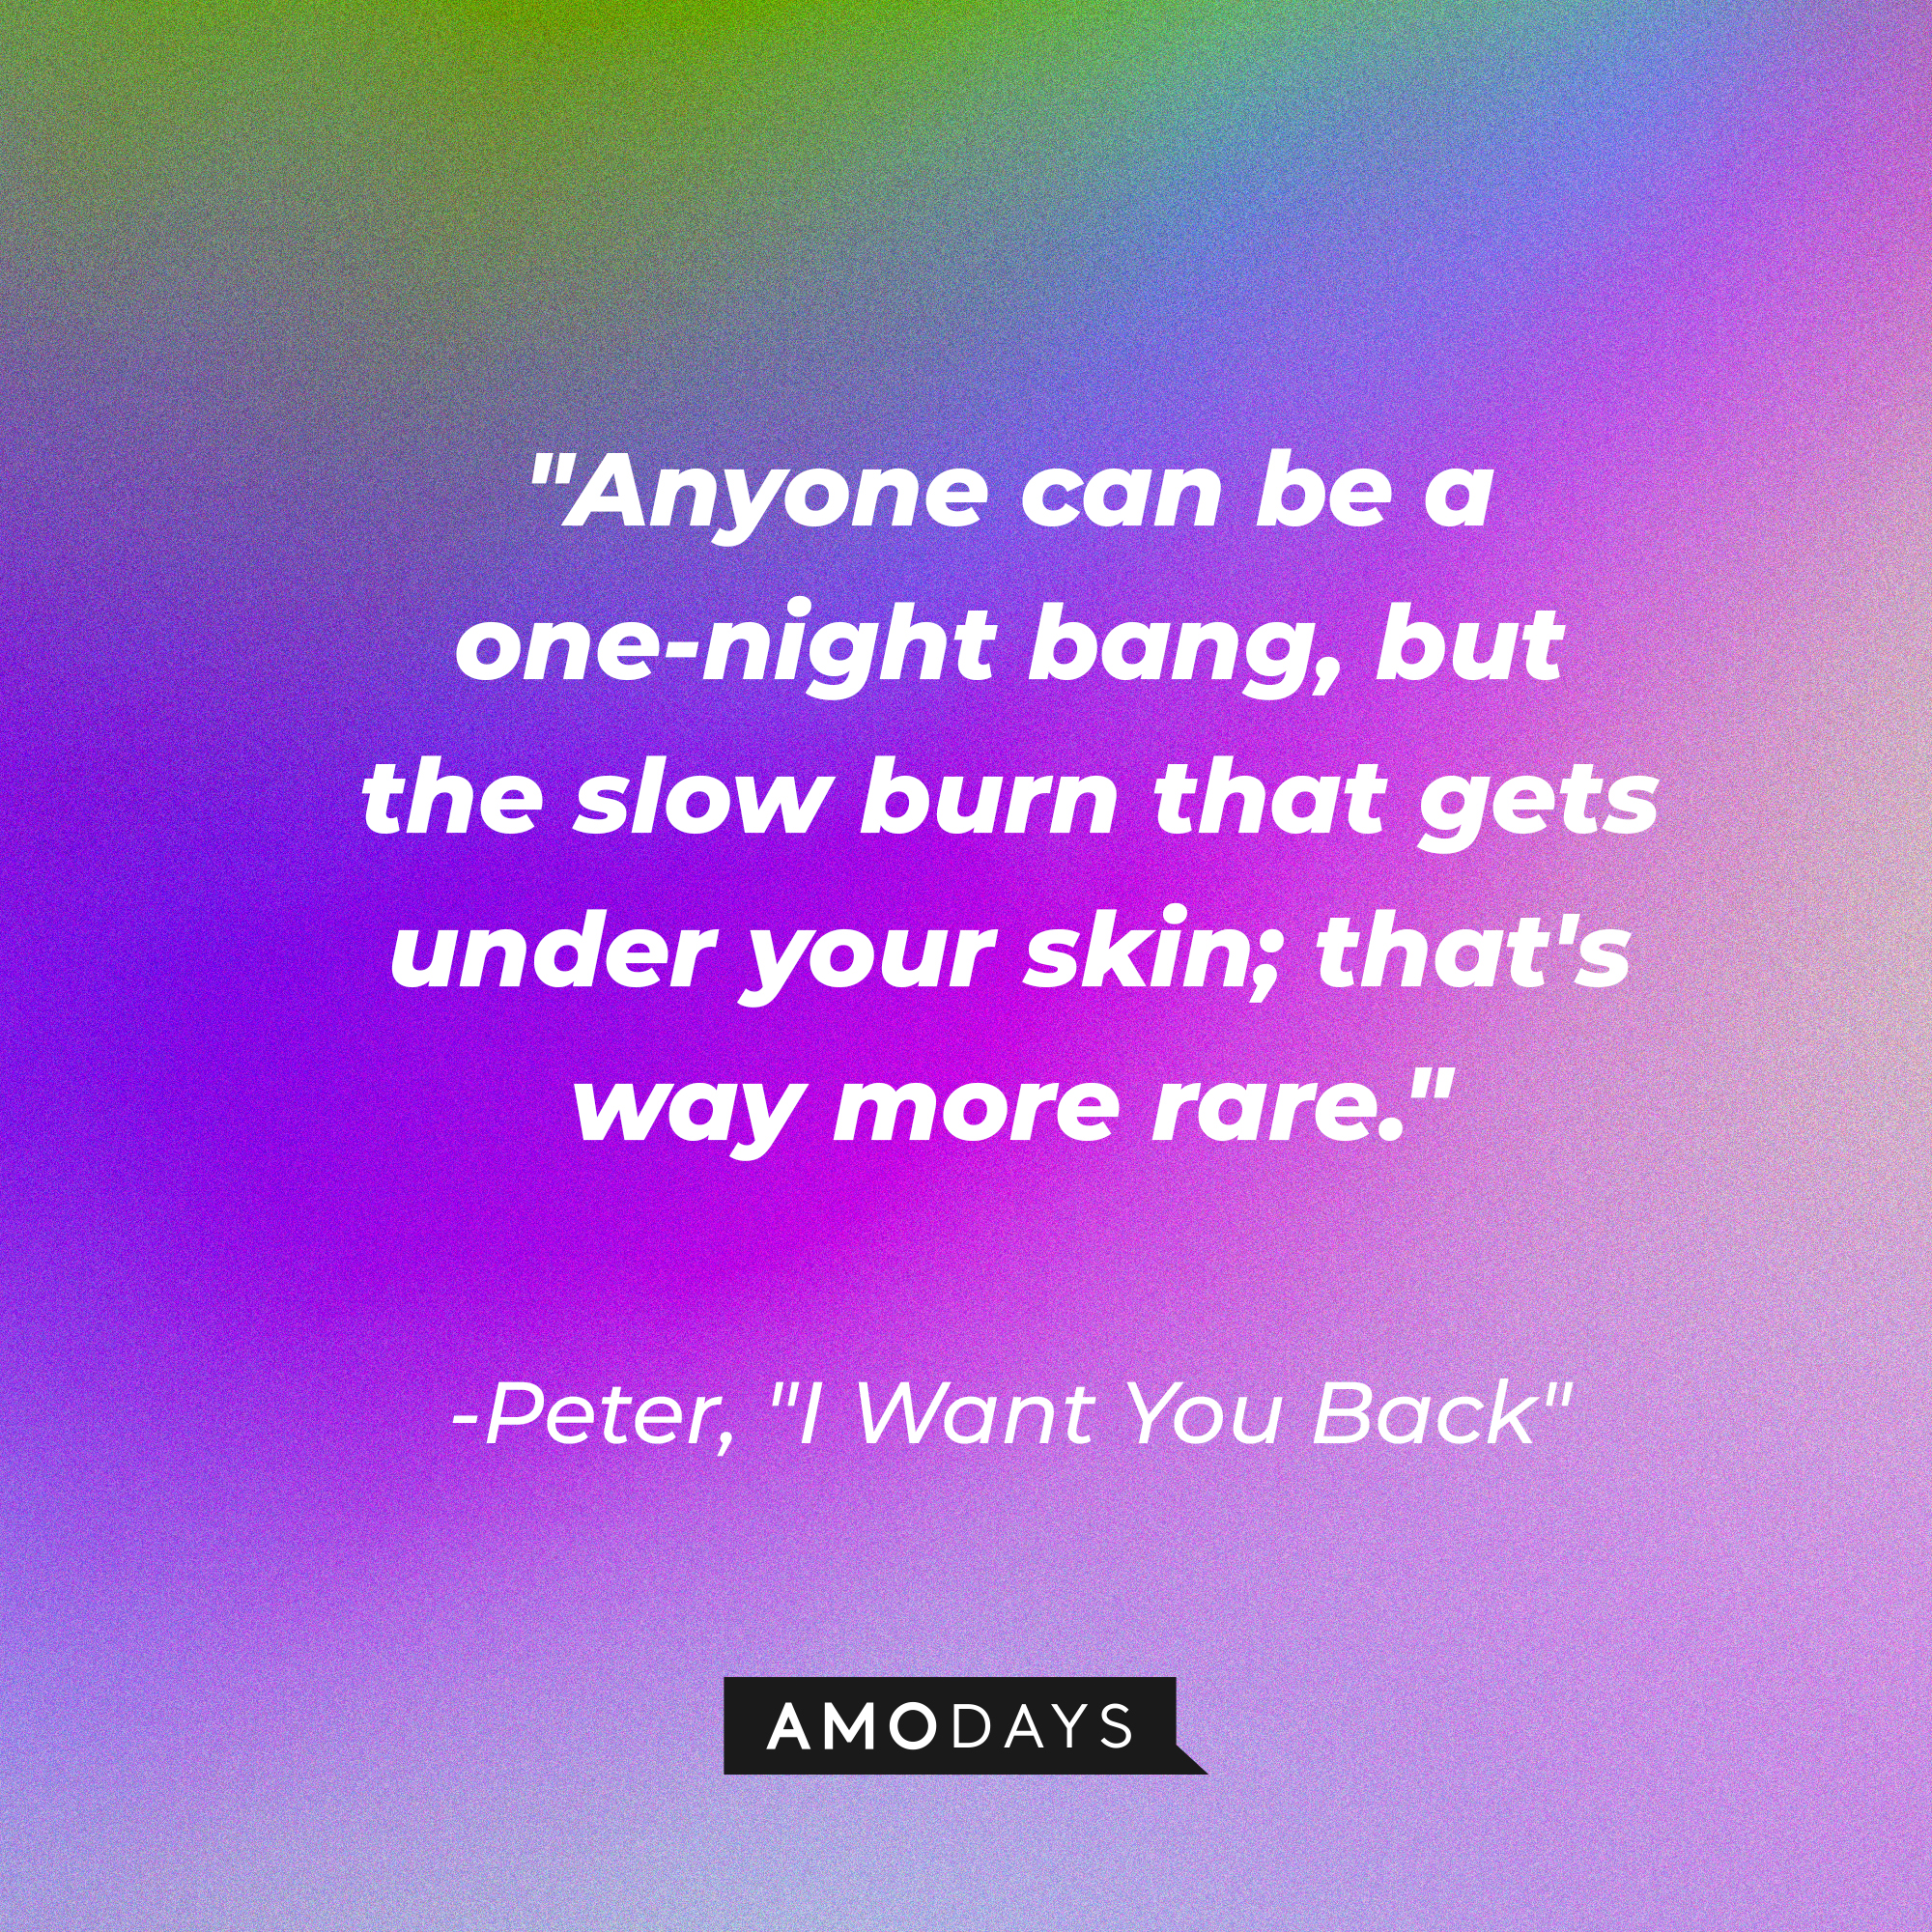 Peter's quote in "I Want You Back:" "Anyone can be a one-night bang, but the slow burn that gets under your skin; that's way more rare." | Source: AmoDays